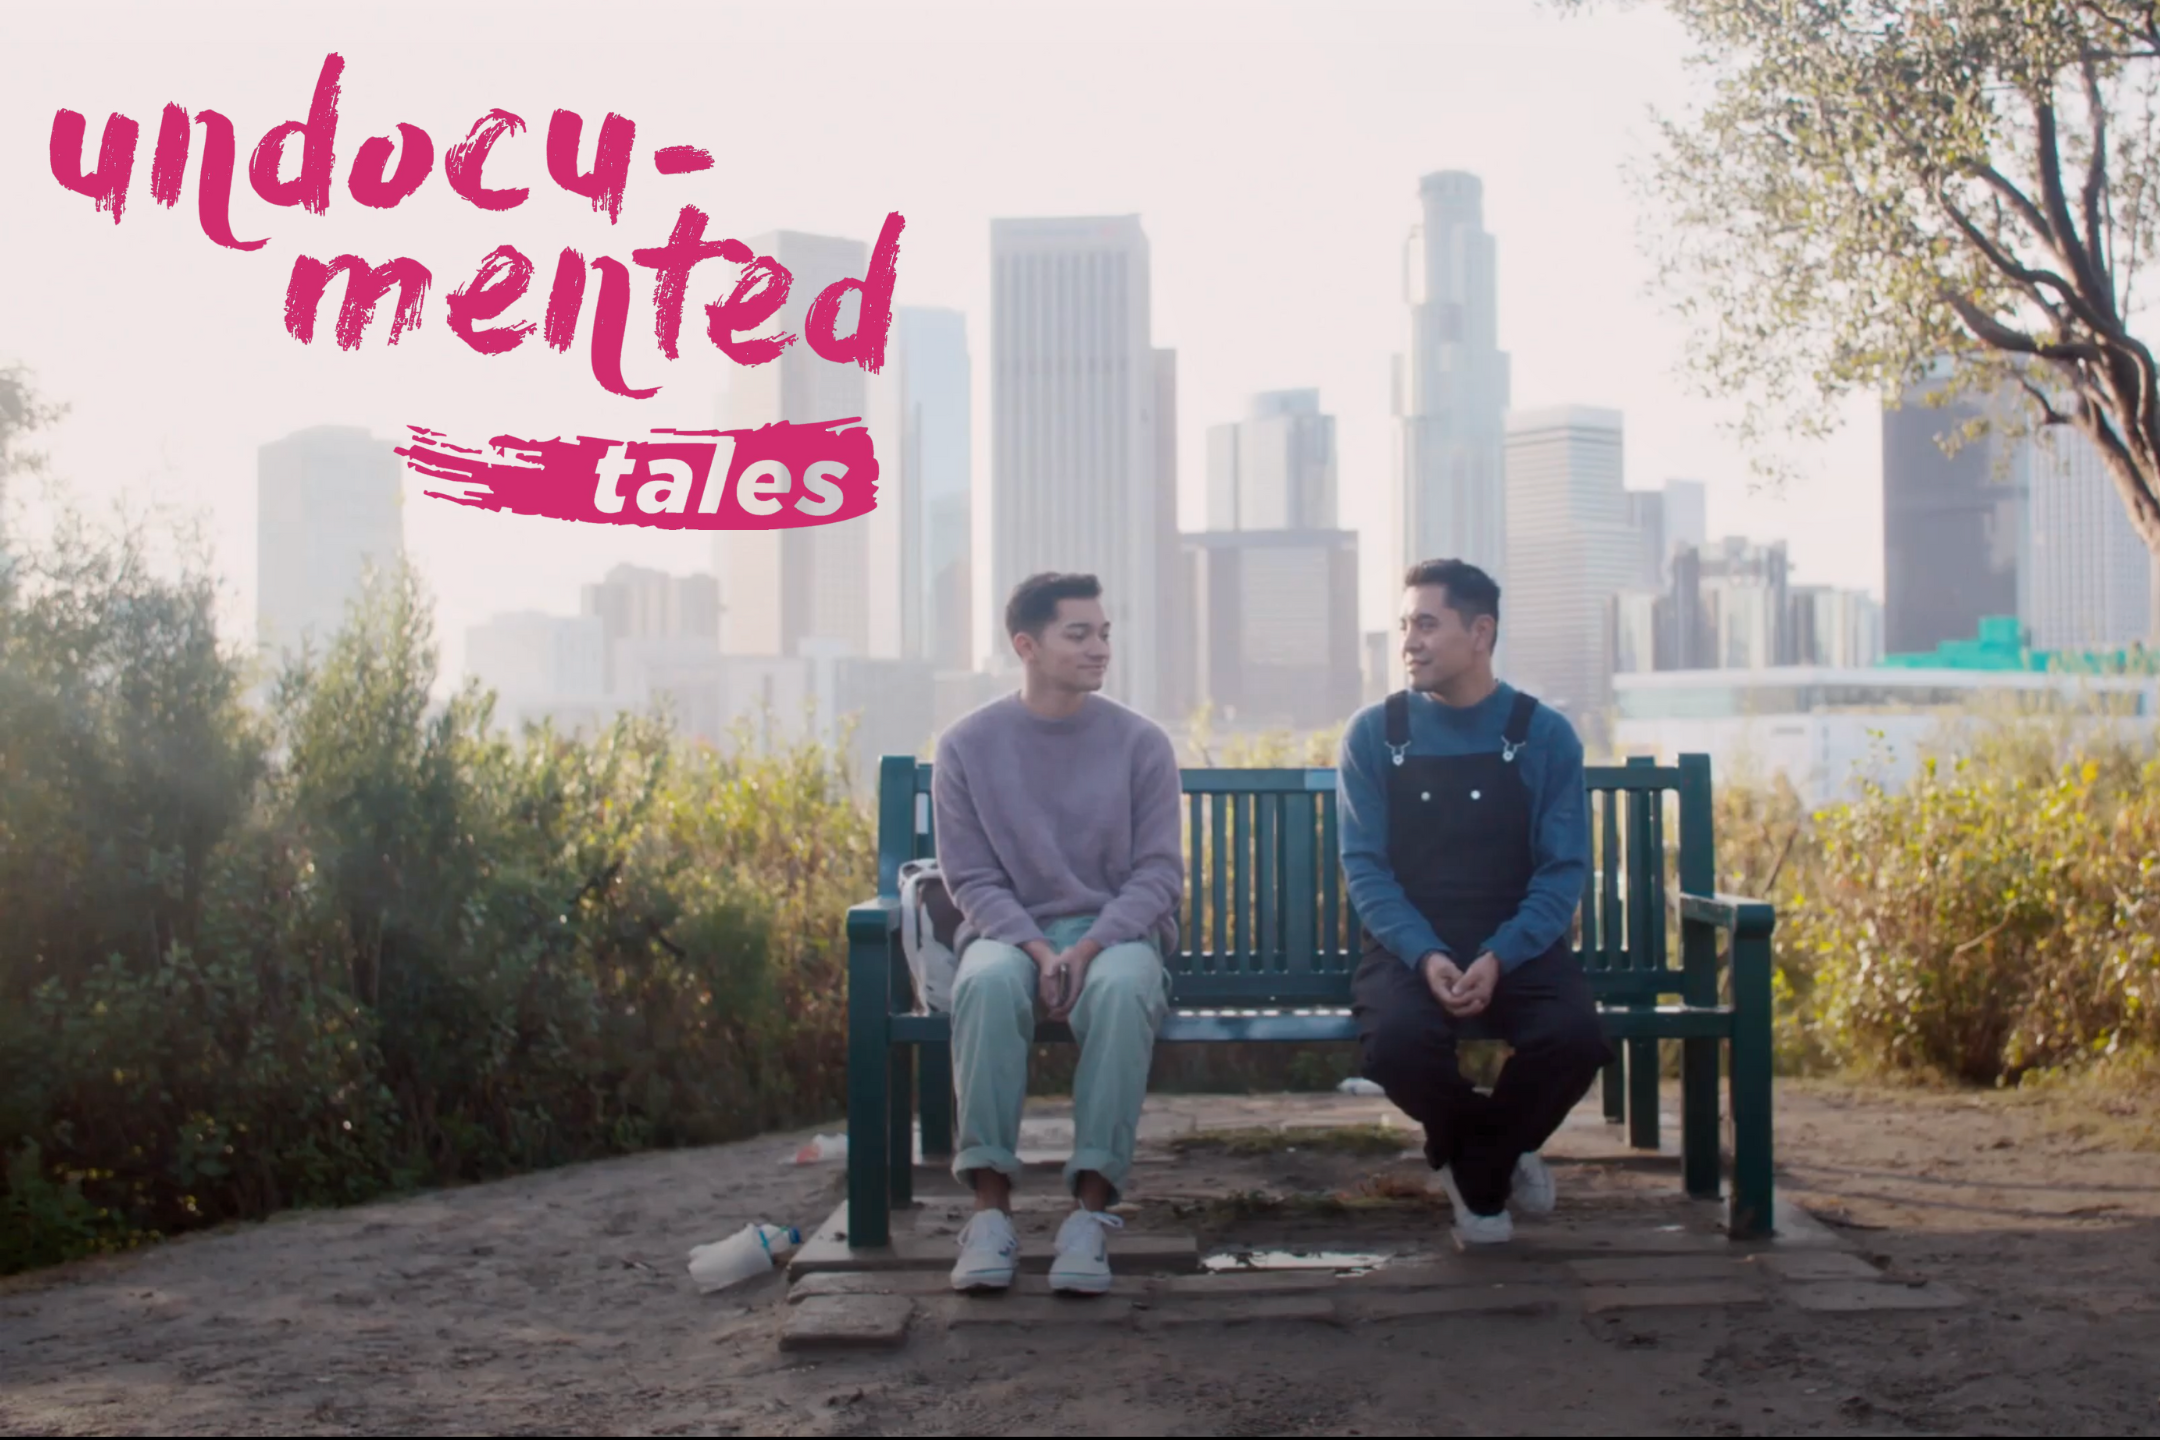 "Undocumented Tales" on the upper left with two men sitting on a bench